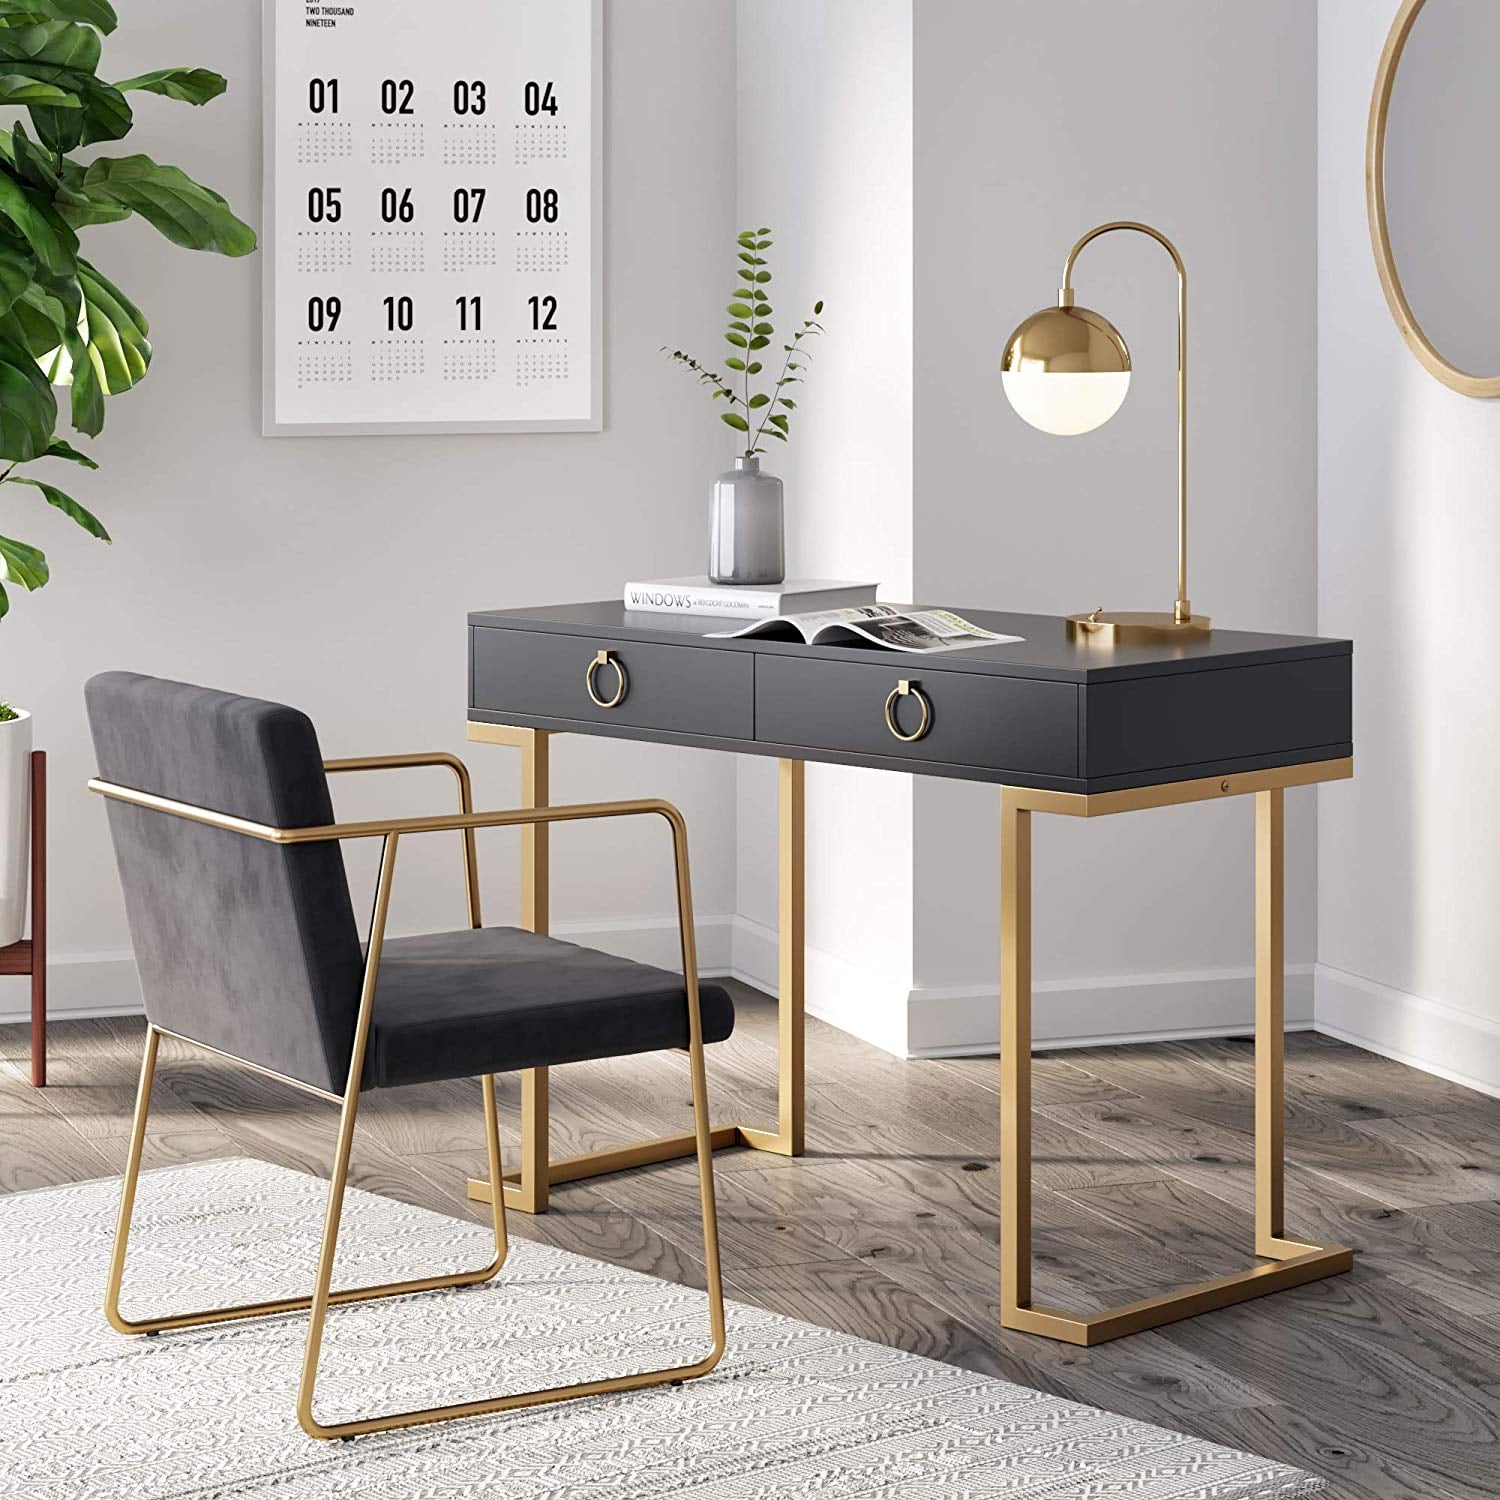 Best Home Office Furniture From Amazon Popsugar Home